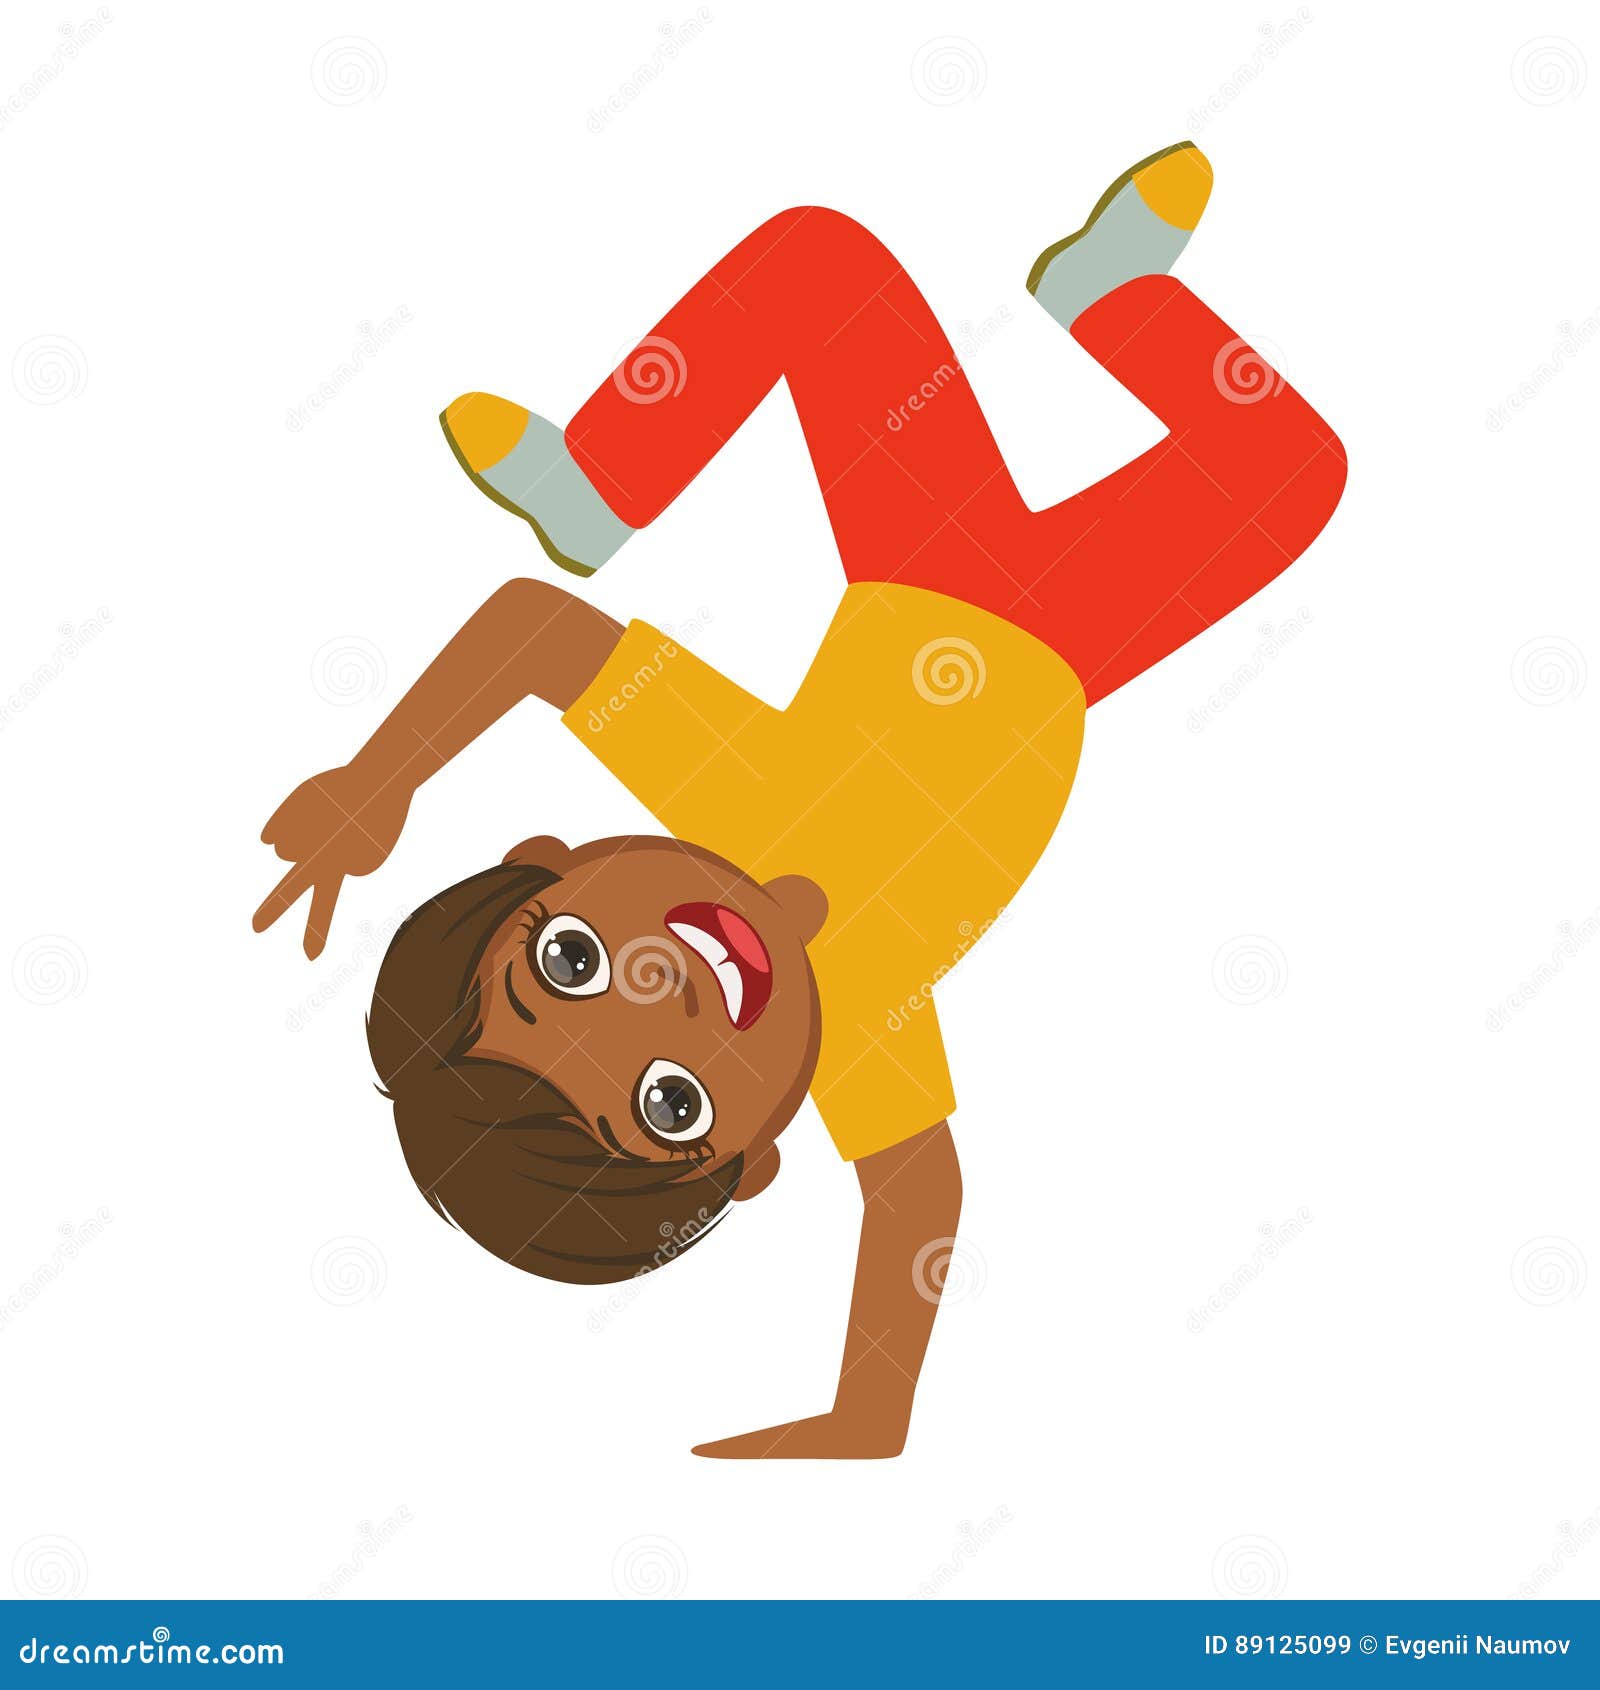 boy standing upside down on one hand dancing breakdance performing on stage, school showcase participant with musical